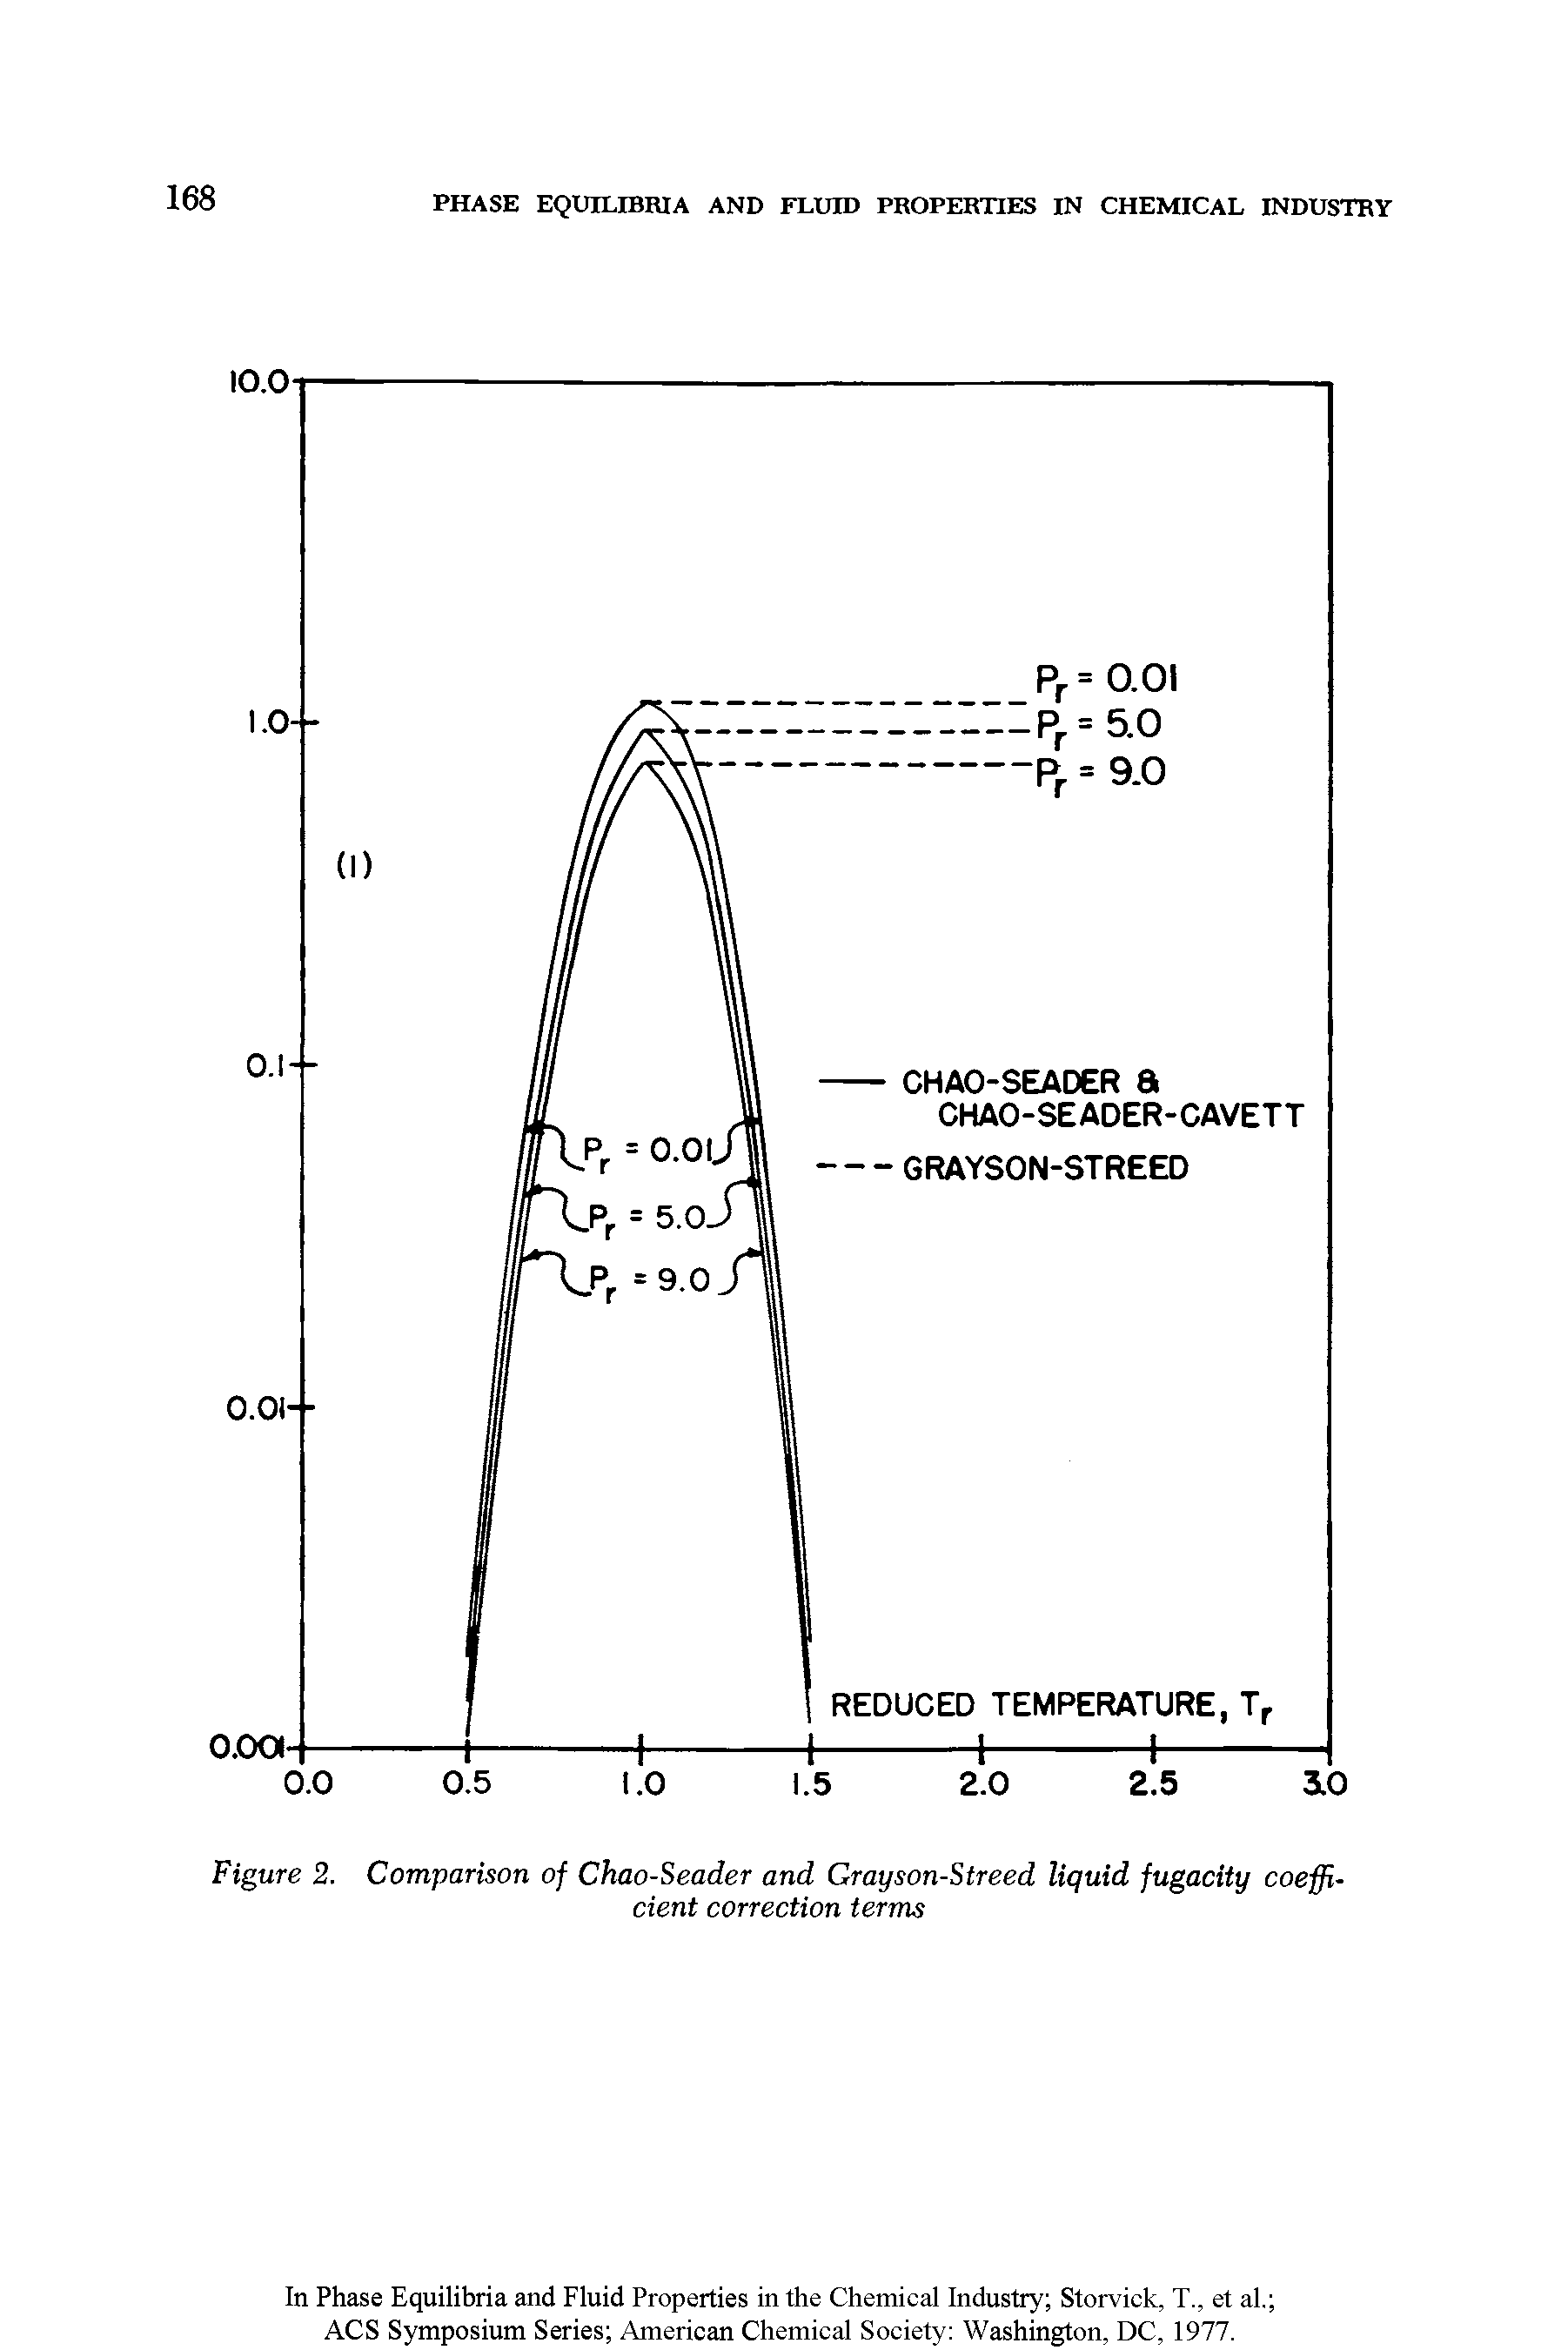 Figure 2. Comparison of Chao-Seader and Grayson-Streed liquid fugacity coefficient correction terms...